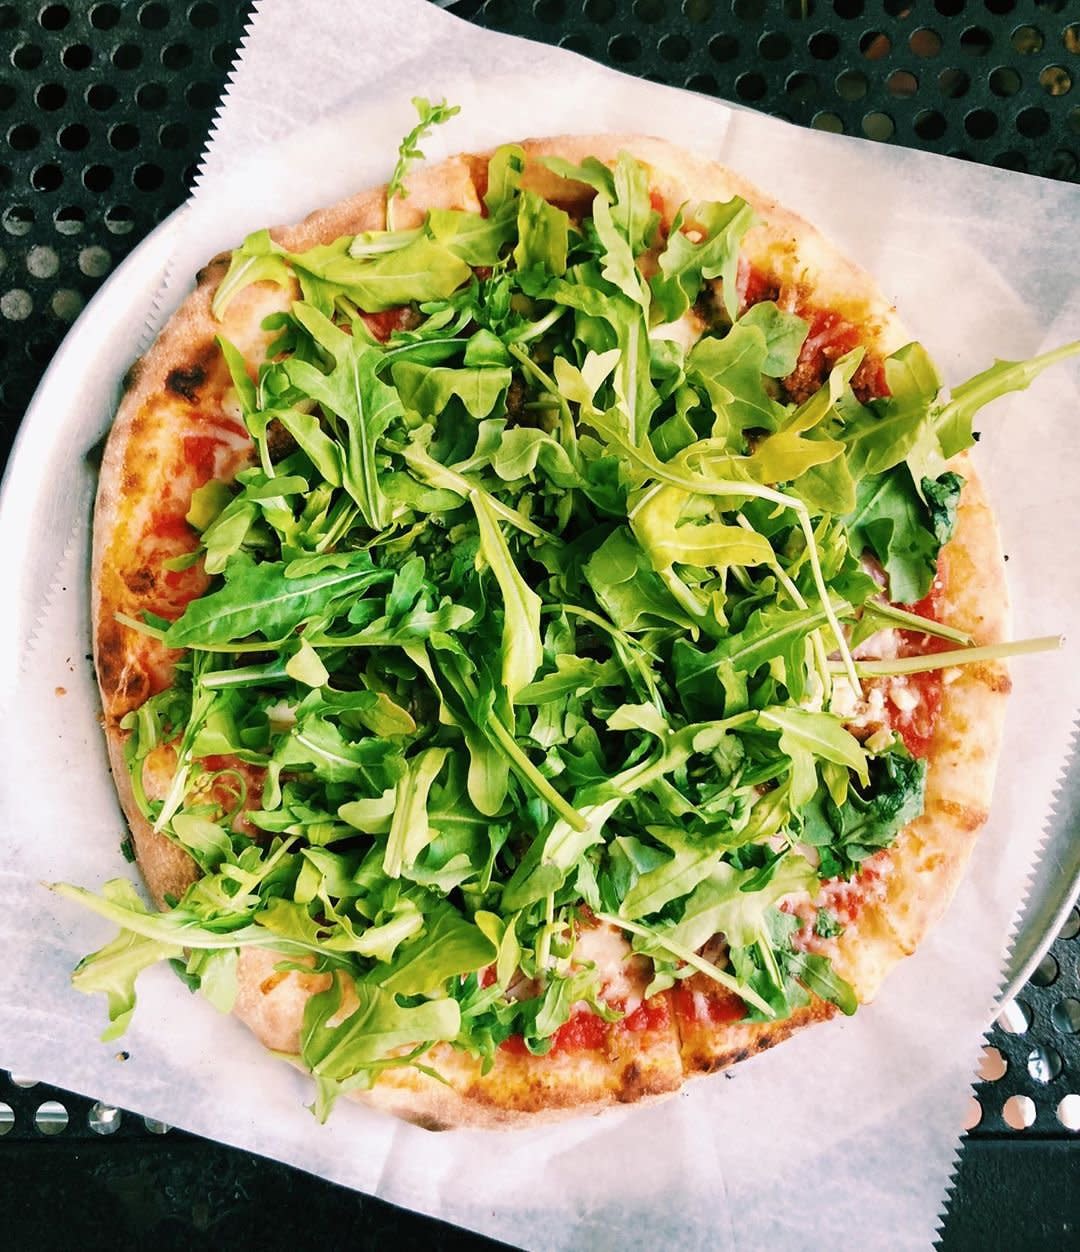 A pizza from Ted's Most Best. Photo by: abigailandmaci_arehungryagain